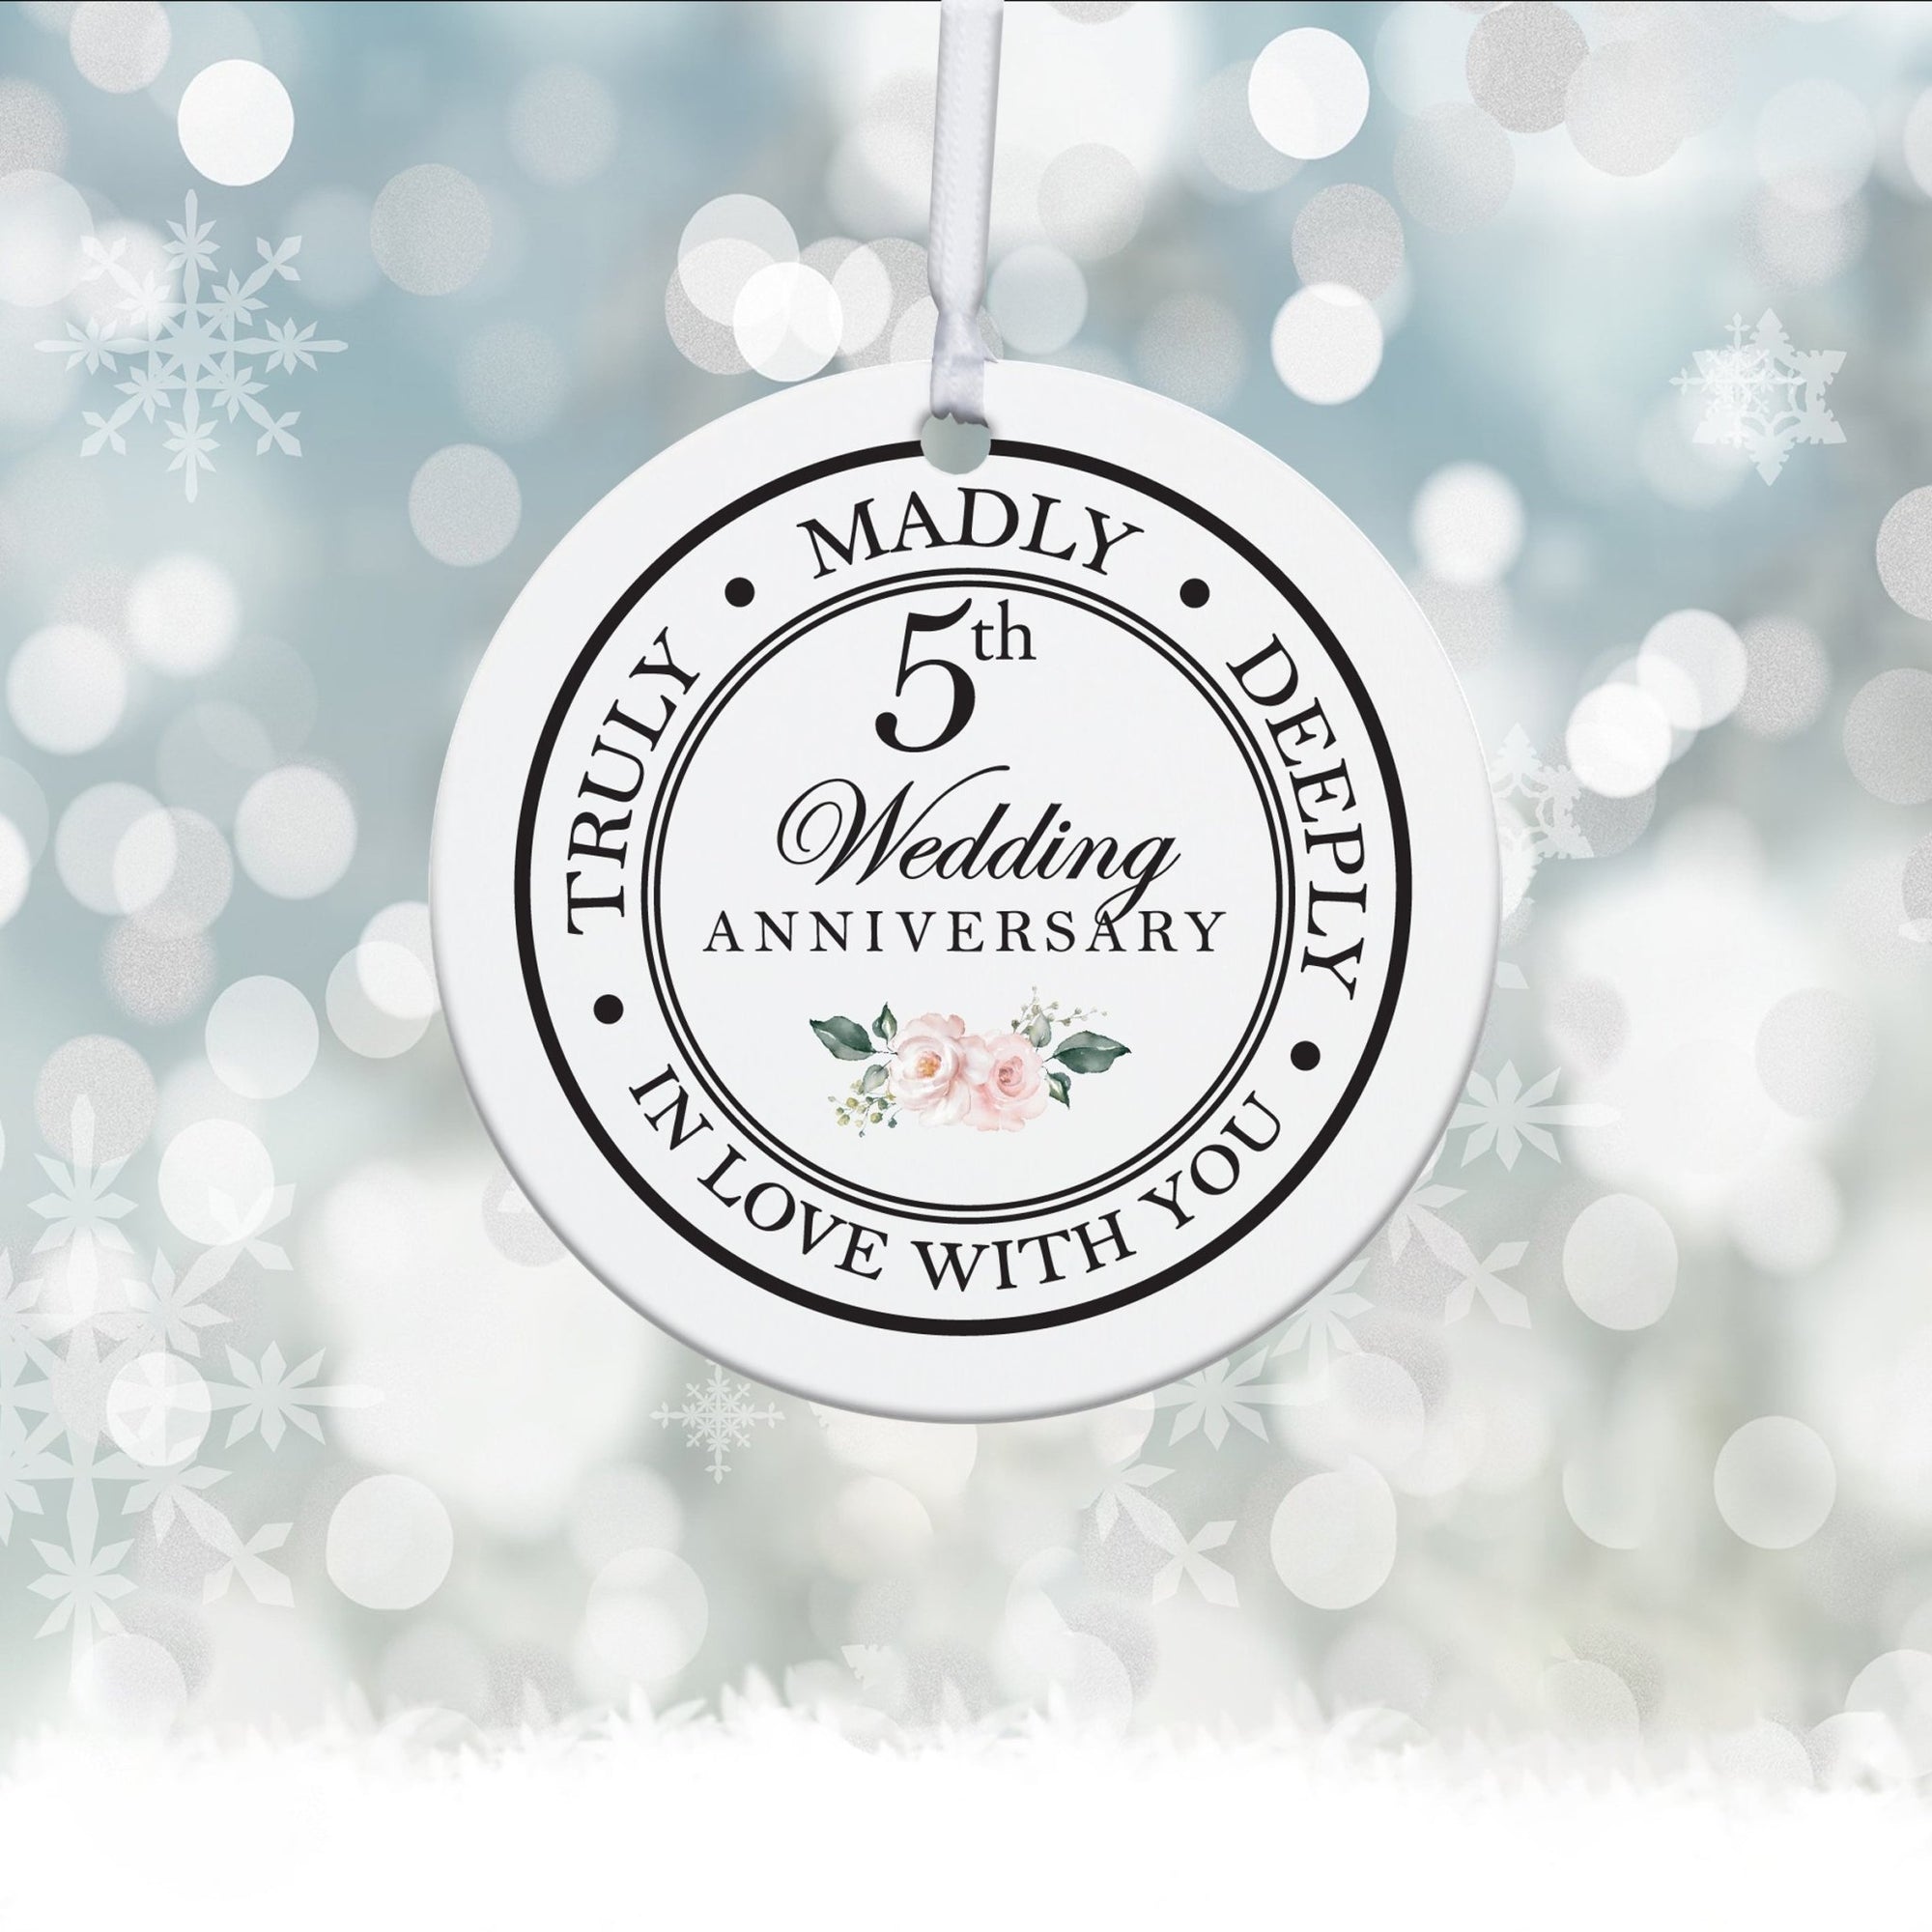 5th Wedding Anniversary White Ornament With Inspirational Message Gift Ideas - Truly, Madly, Deeply In Love With You - LifeSong Milestones